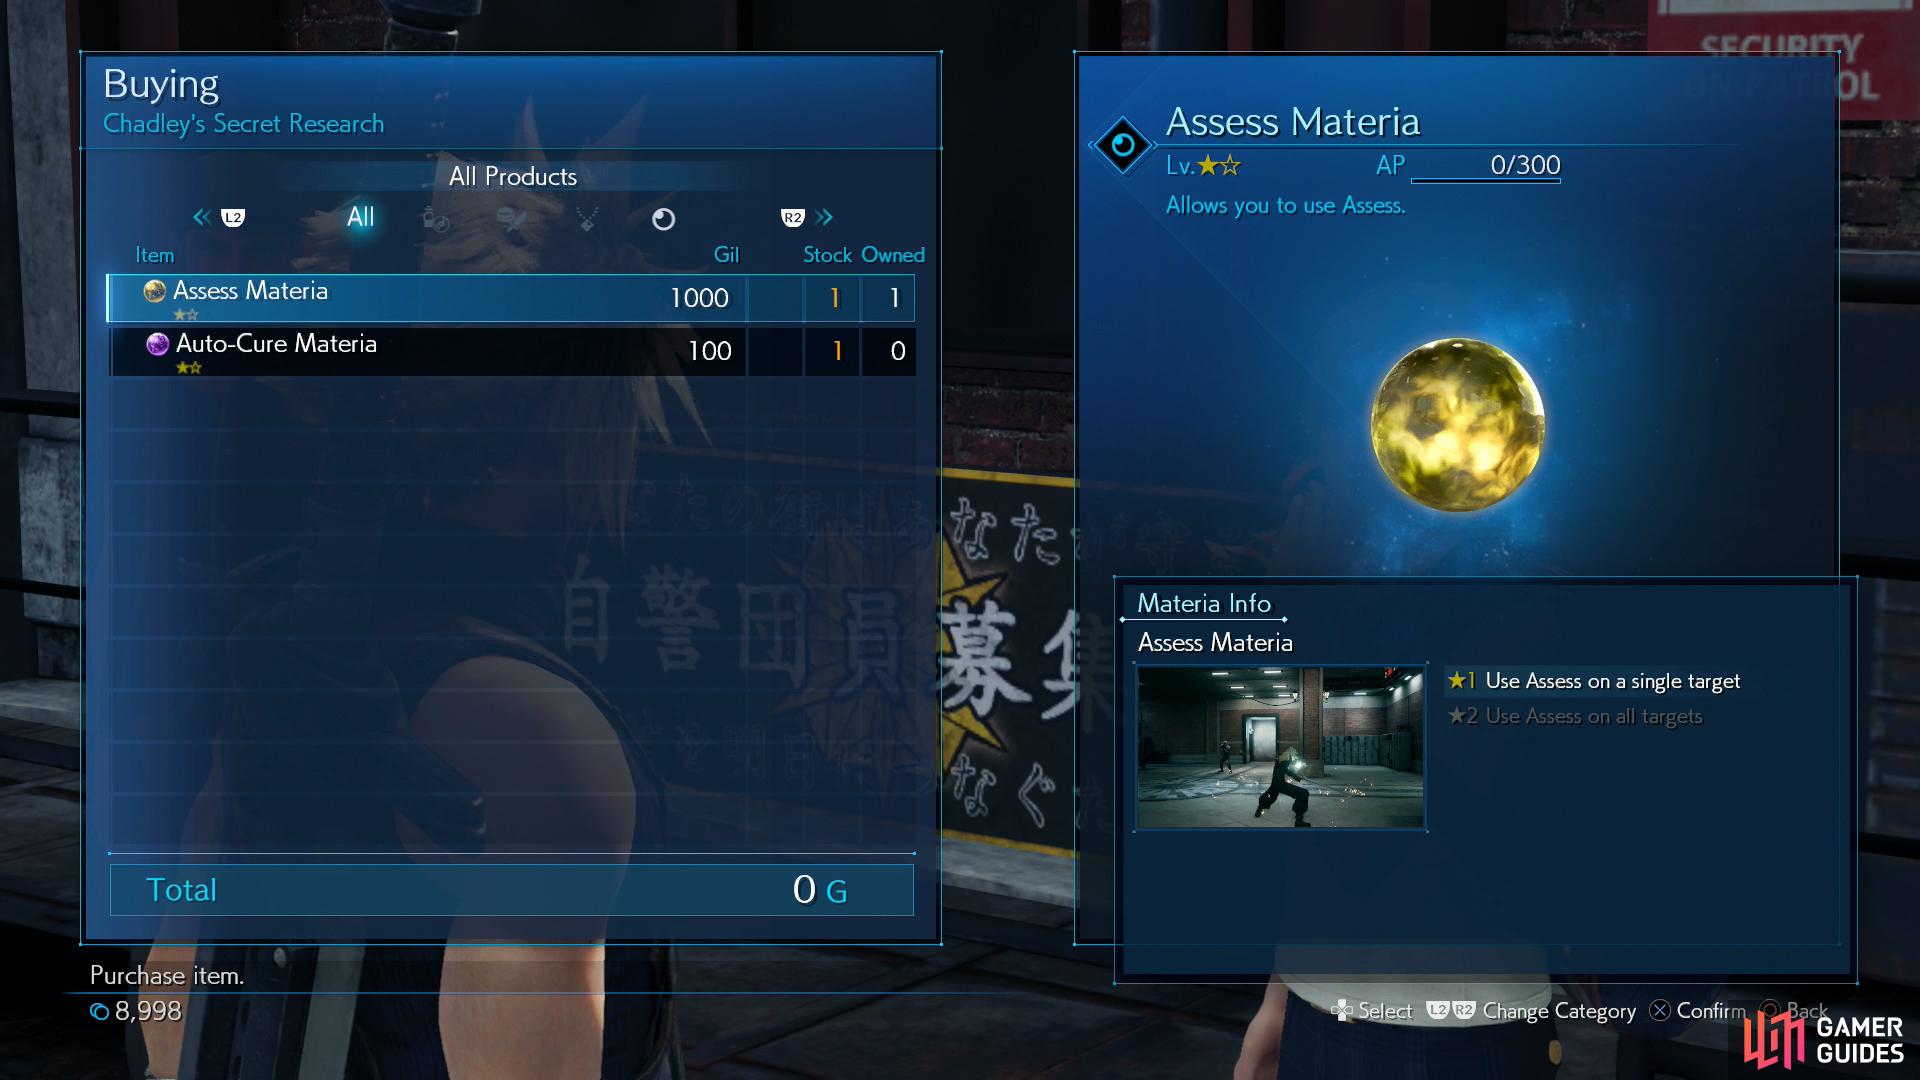 Chadley will sell you new materia as you complete his Battle Intel Reports.